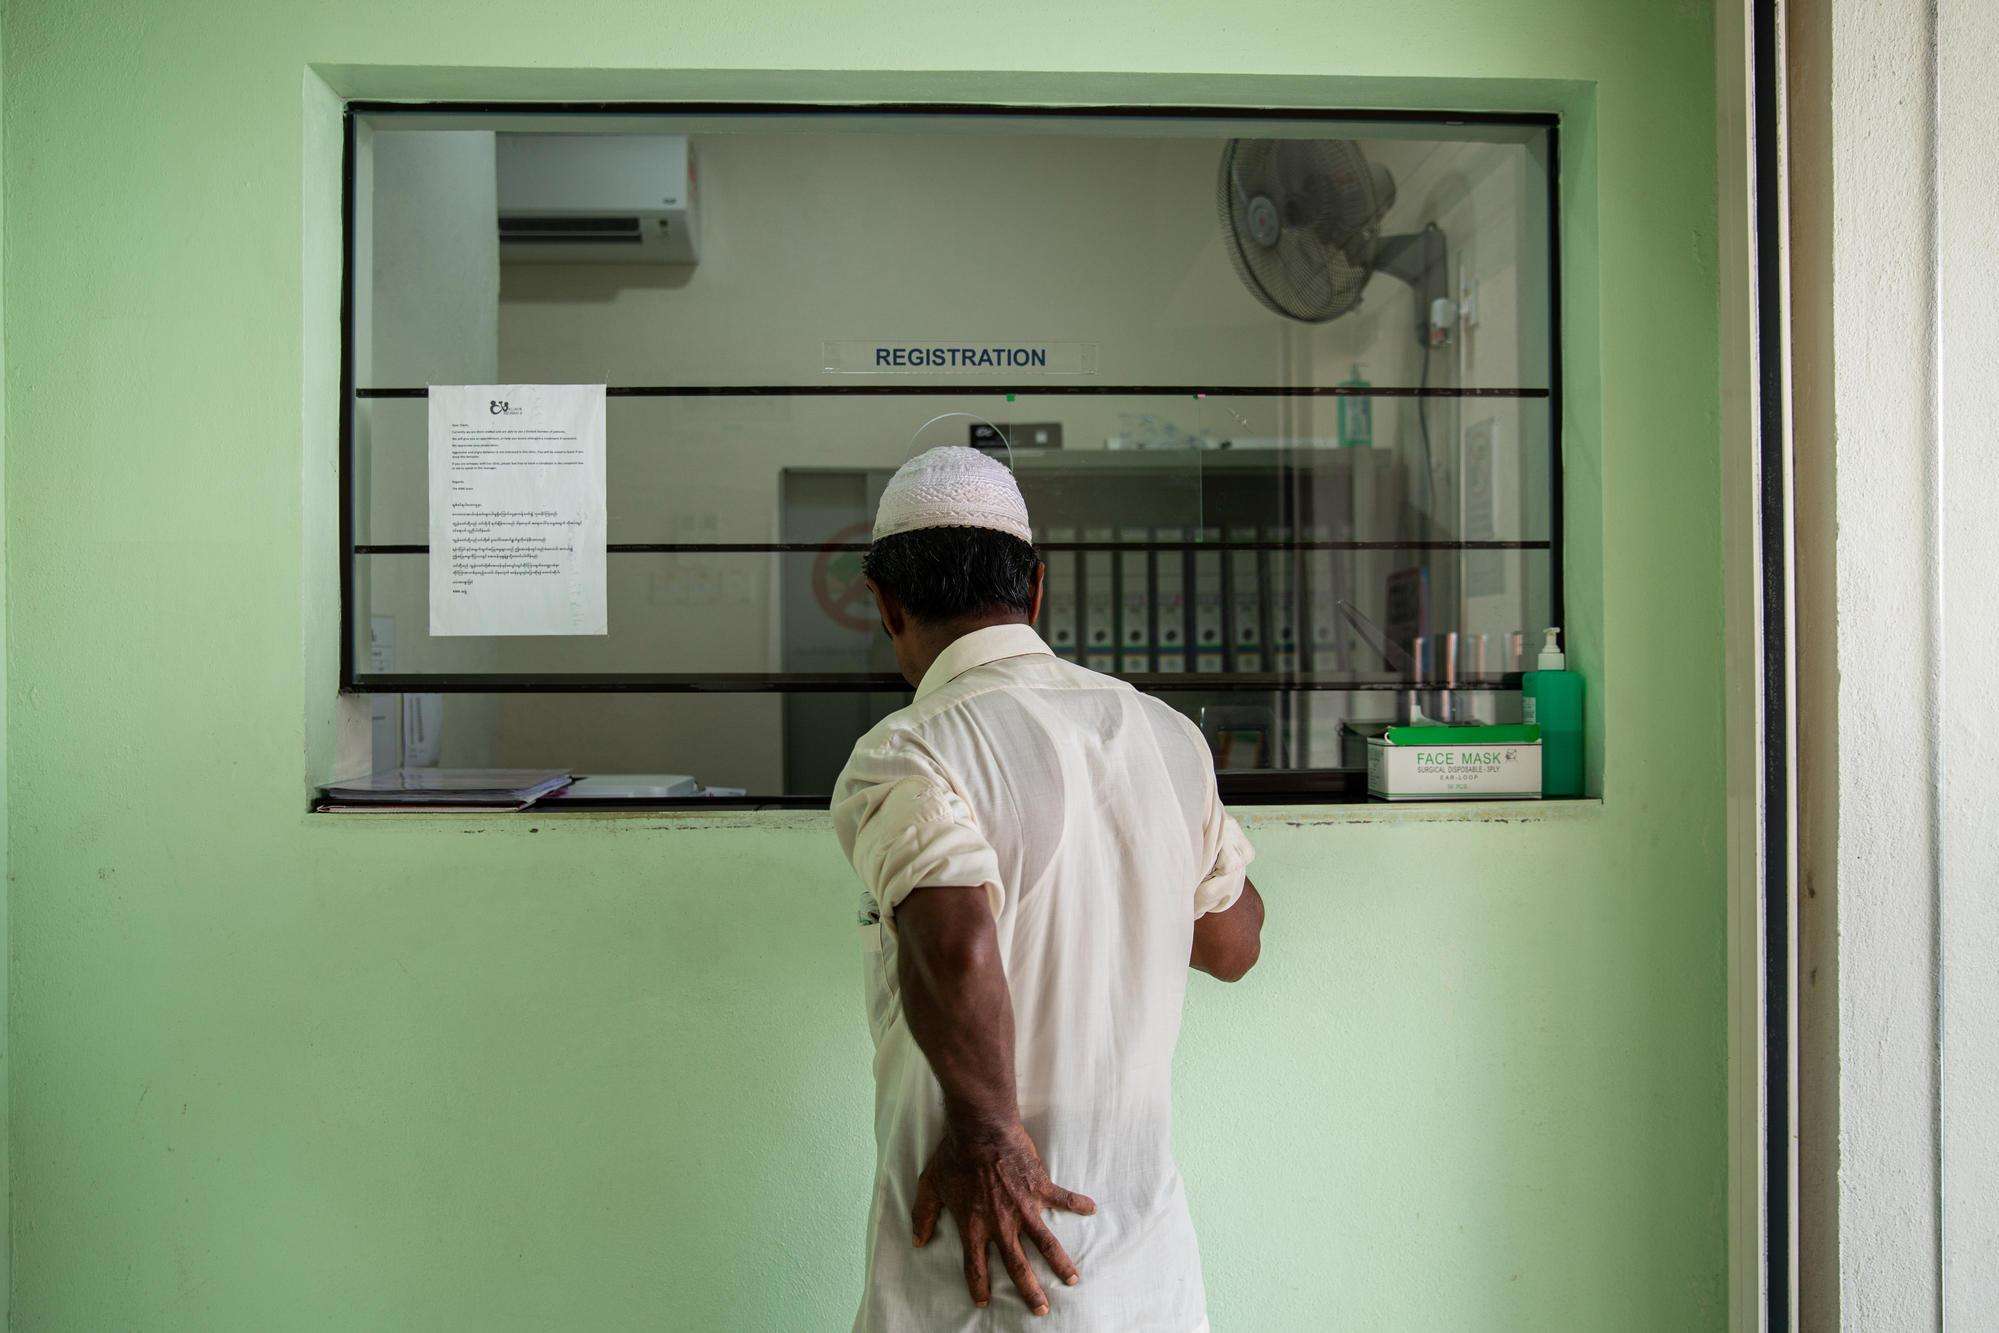 A relative of a Rohingya man who fell two floors while working at a construction site, reports to the registration office at MSF’s clinic in Penang to check on his health. Malaysia, April 2019.